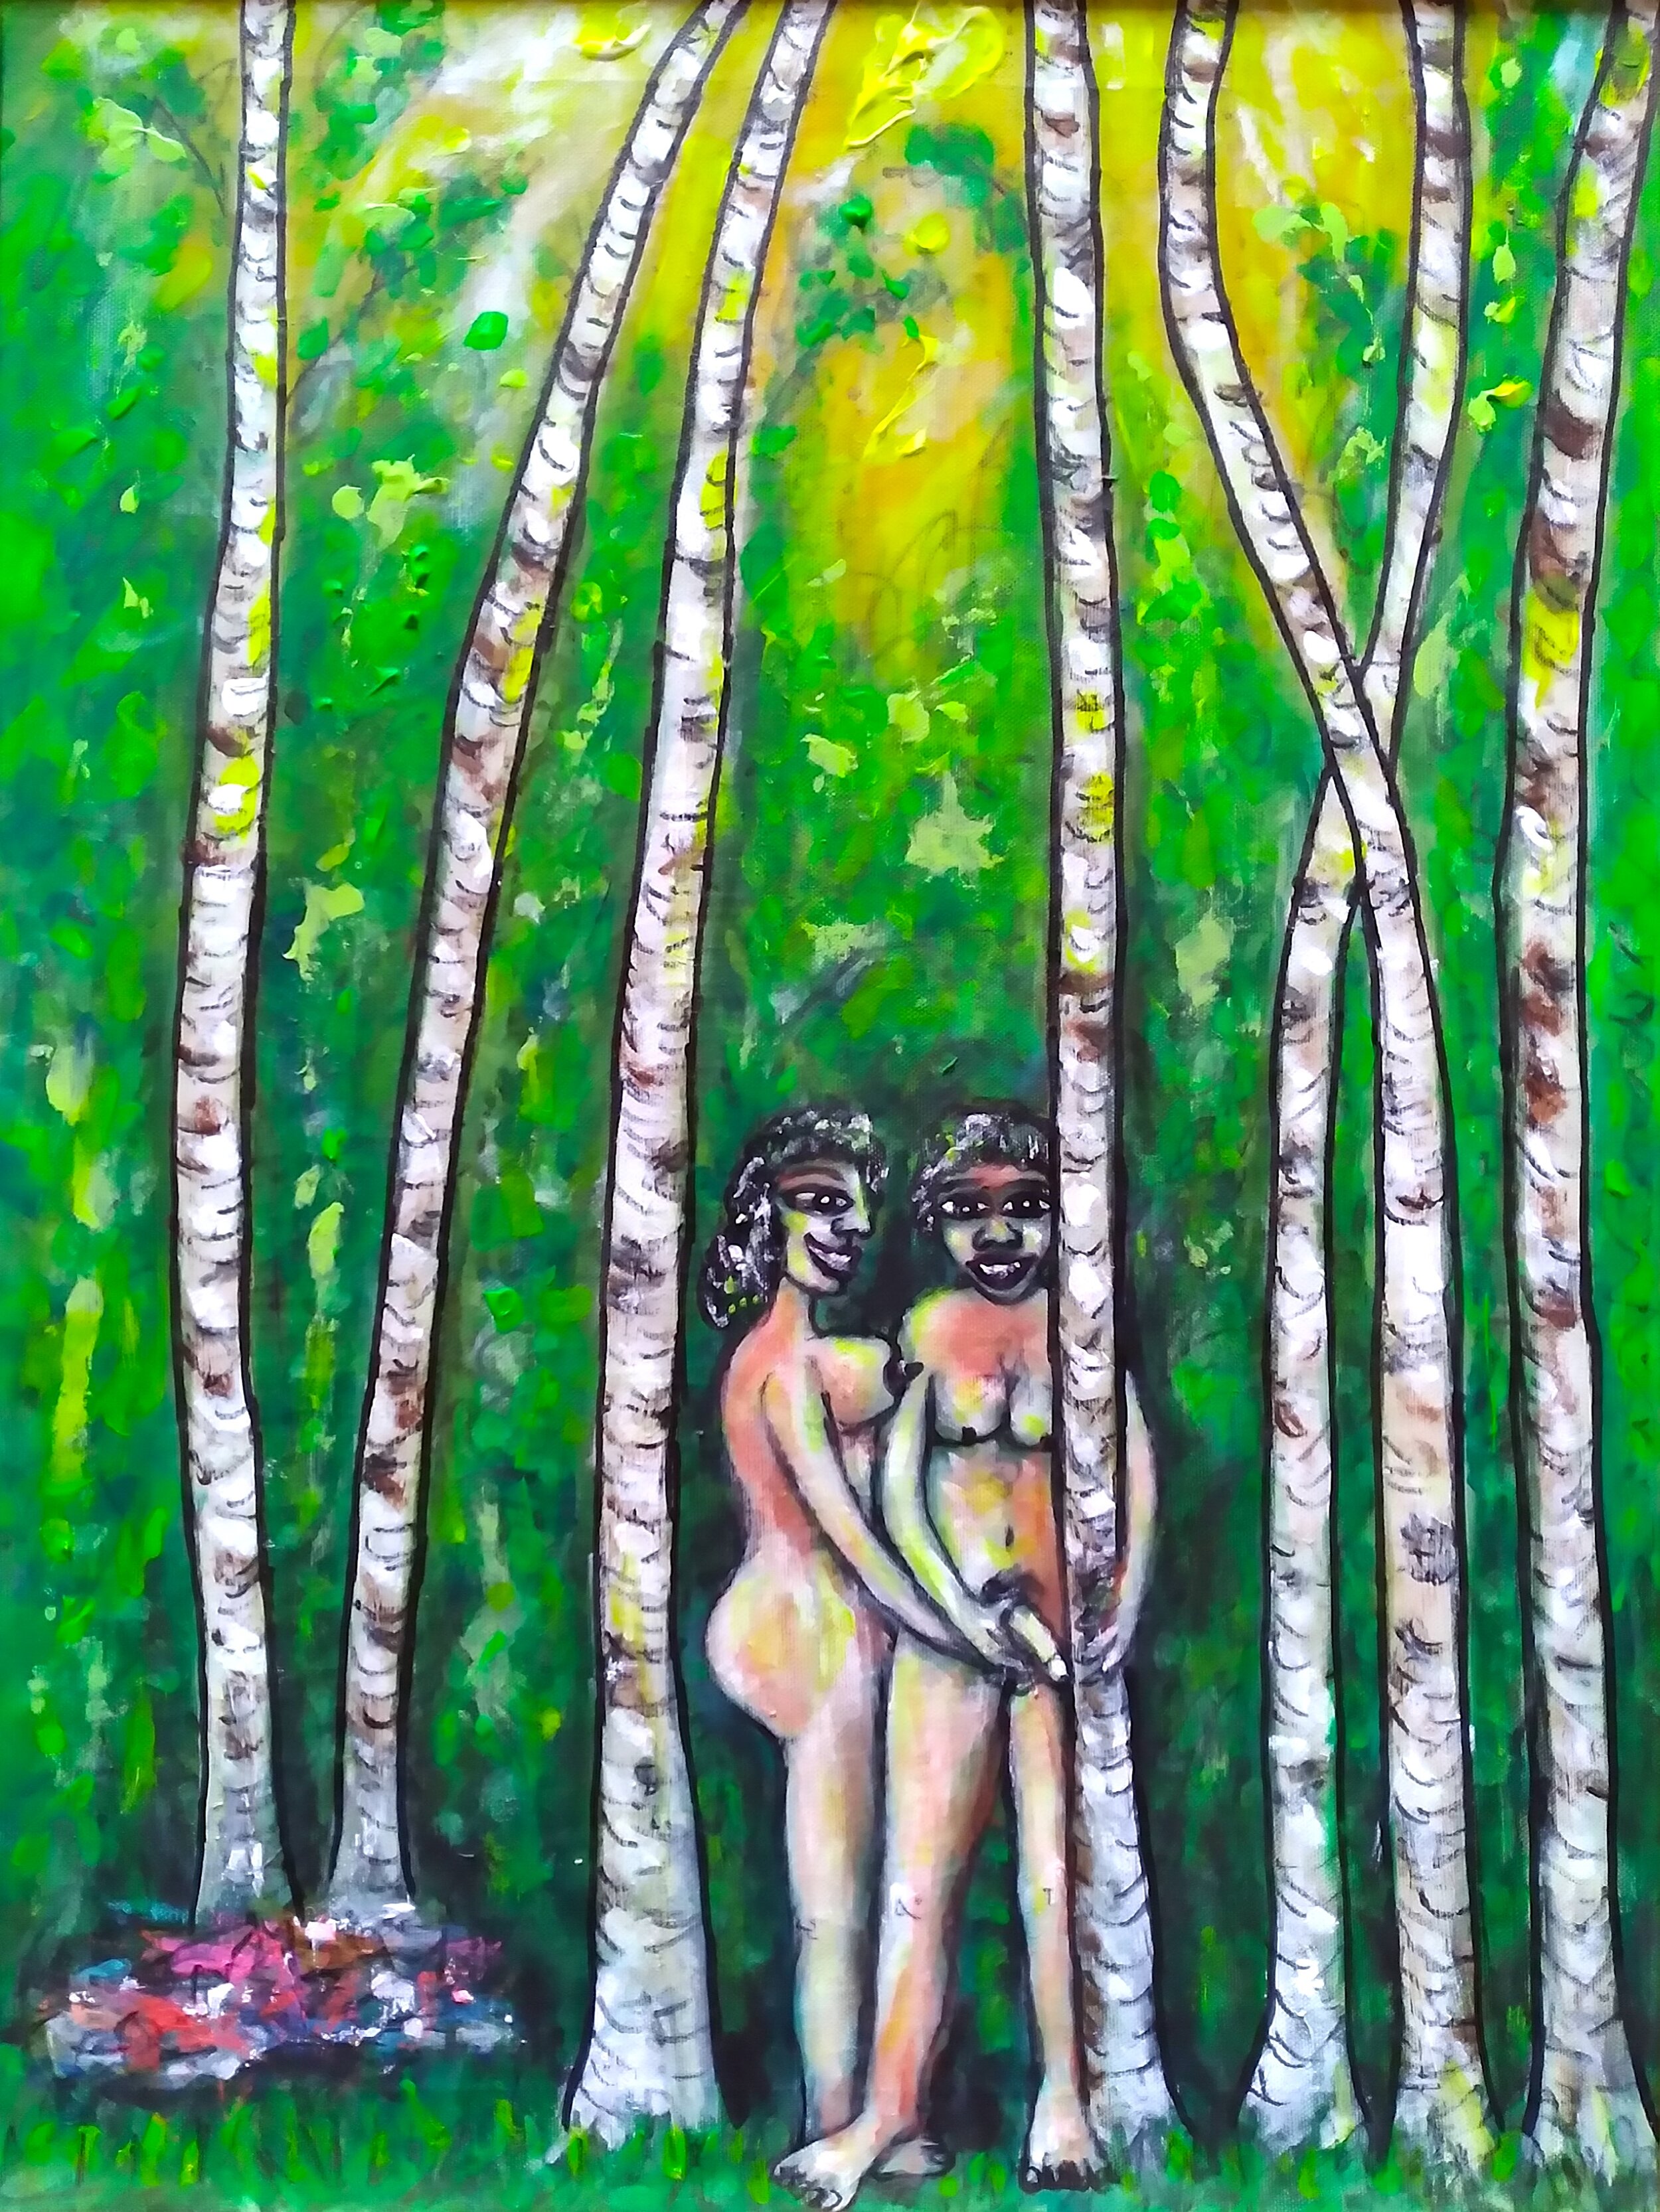 Into the Woods, 2019. Oil, acrylic on canvas. 24" x 18".